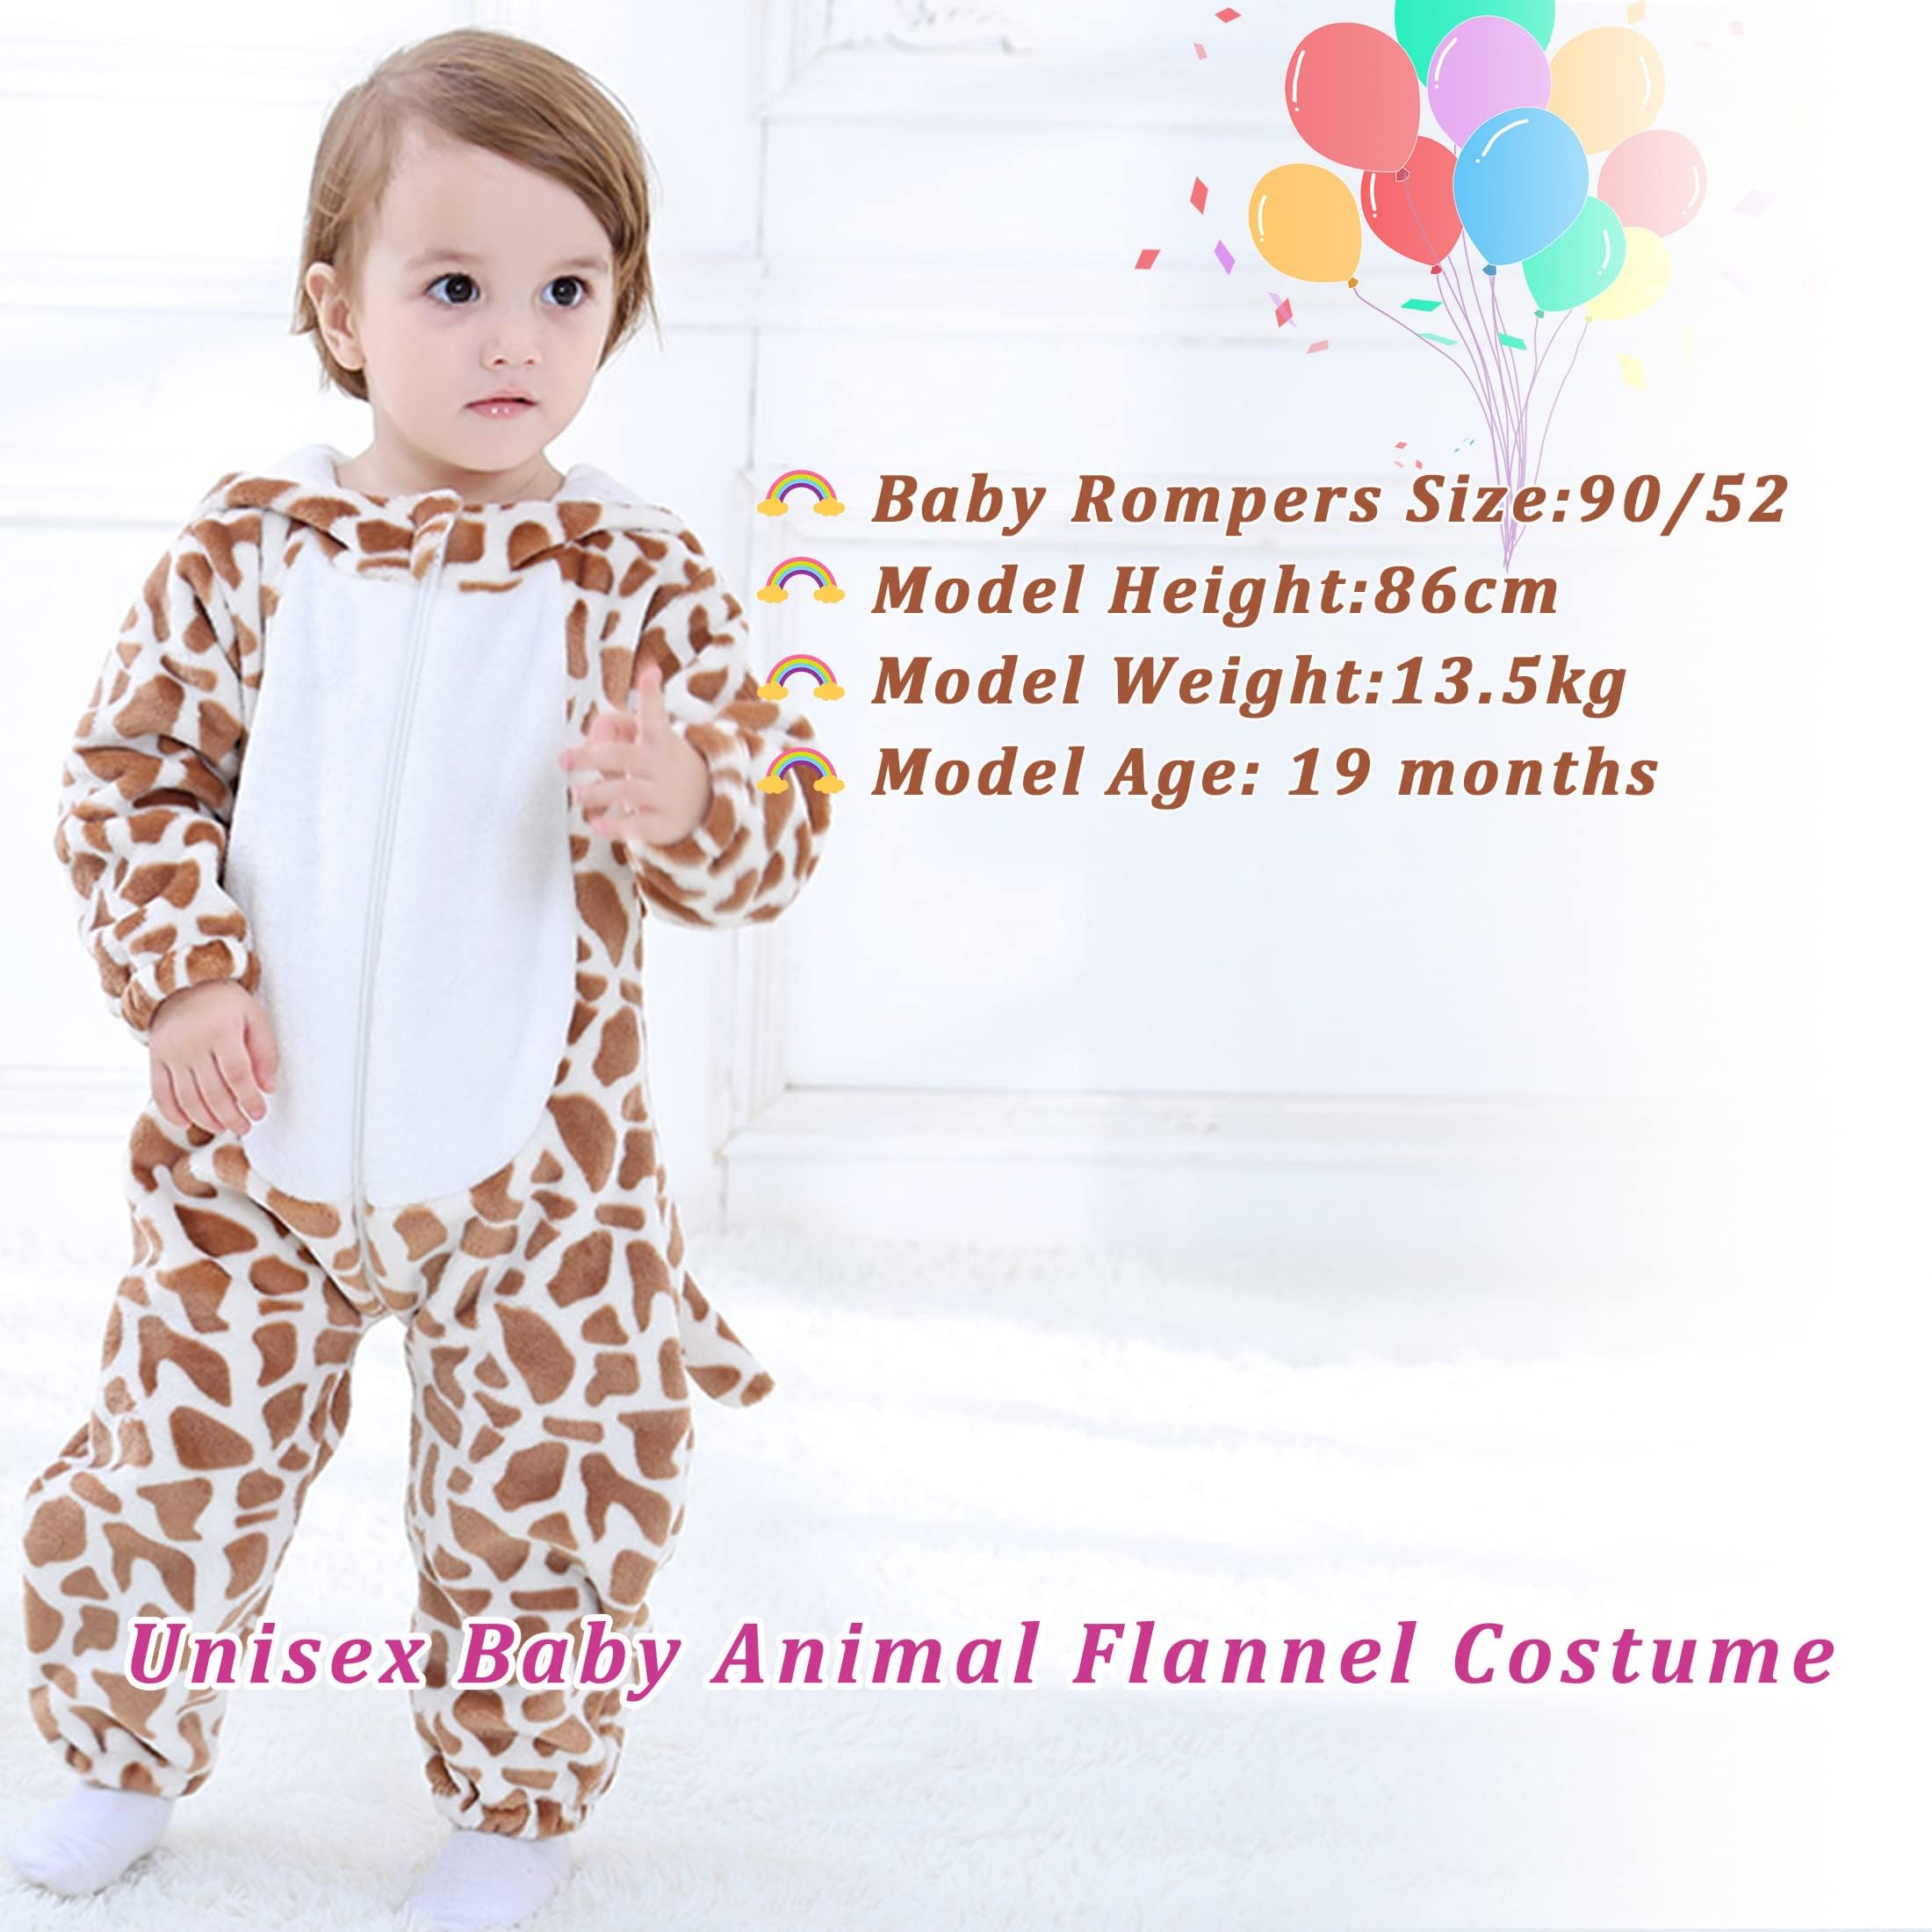 TONWHAR Infant And Toddler Halloween Cosplay Costume Kids' Animal Outfit Snowsuit(6-12 Months/Height:26